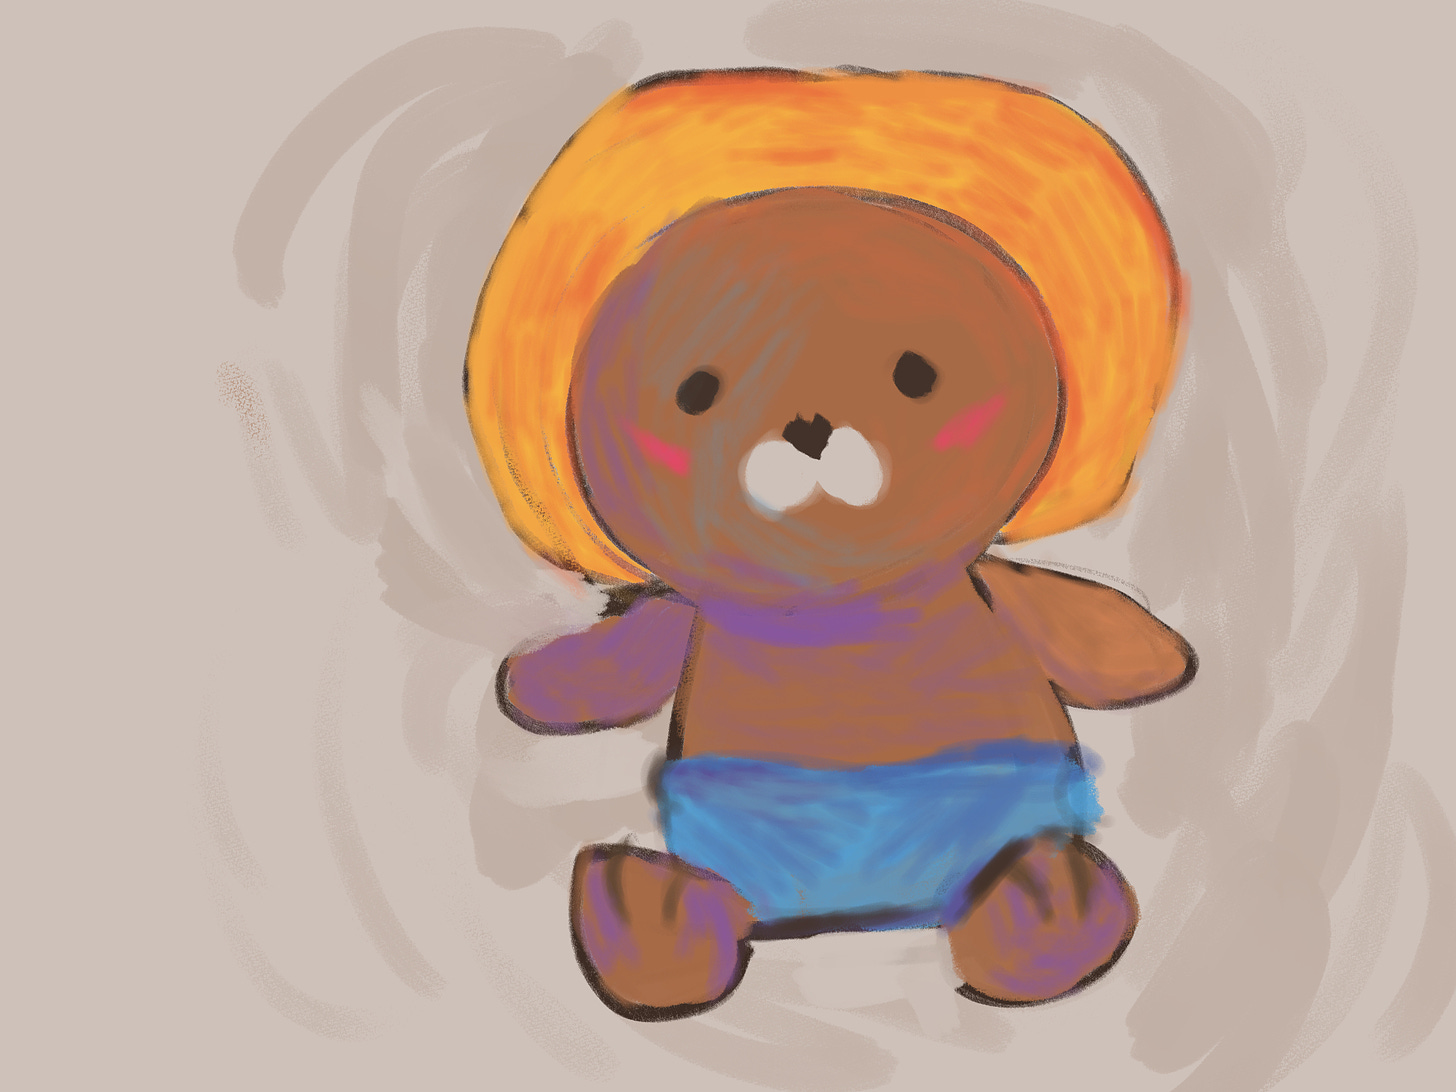 painting of a stuffed dog with blonde fuzzy hair and blue underwear